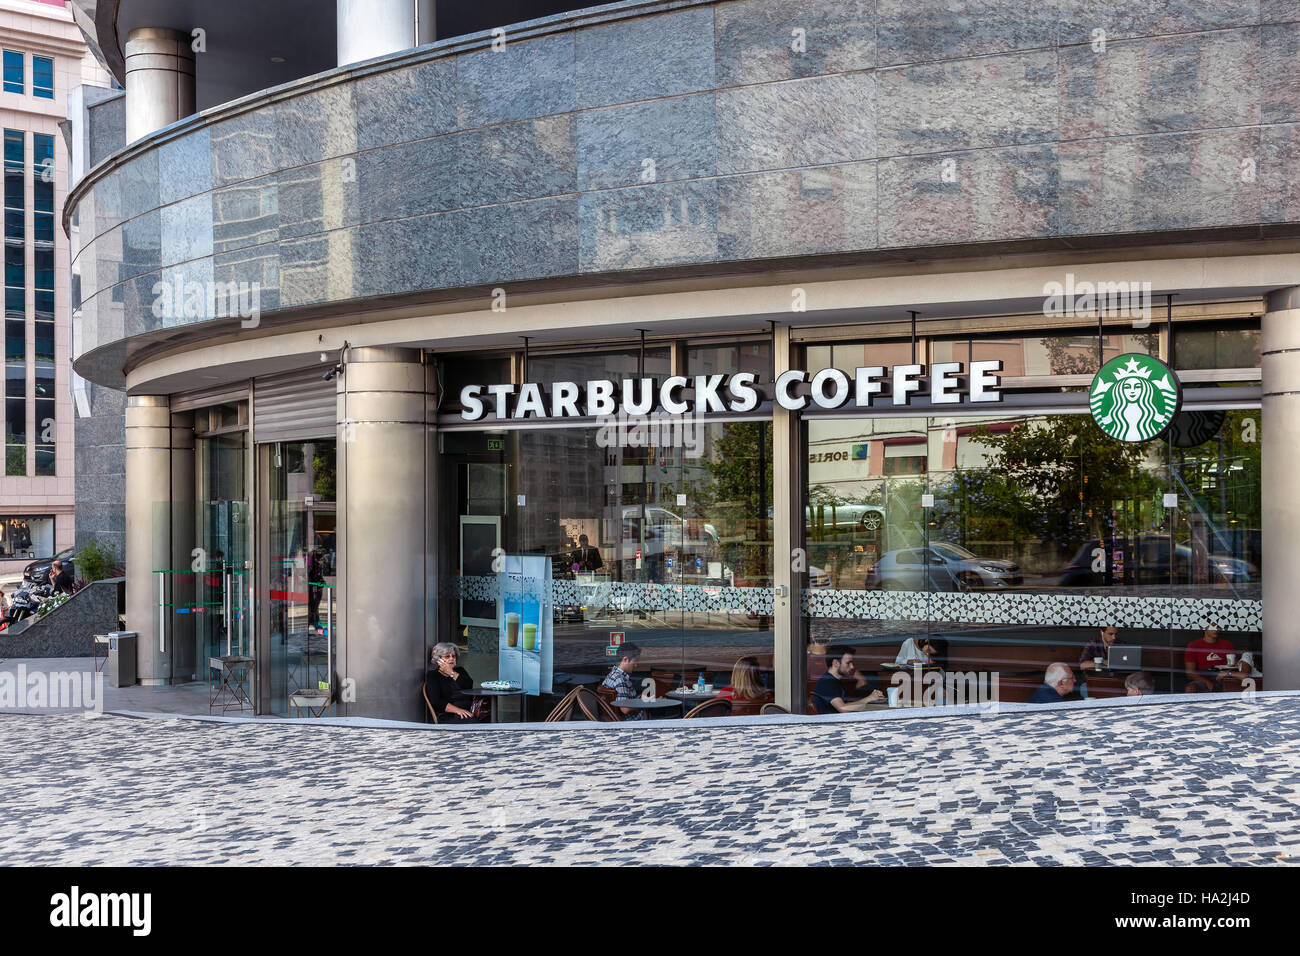 Lisbon, Portugal - October 19, 2016: Starbucks coffee house on the El Corte Ingles Shopping Mall, a high end global retail company. Stock Photo